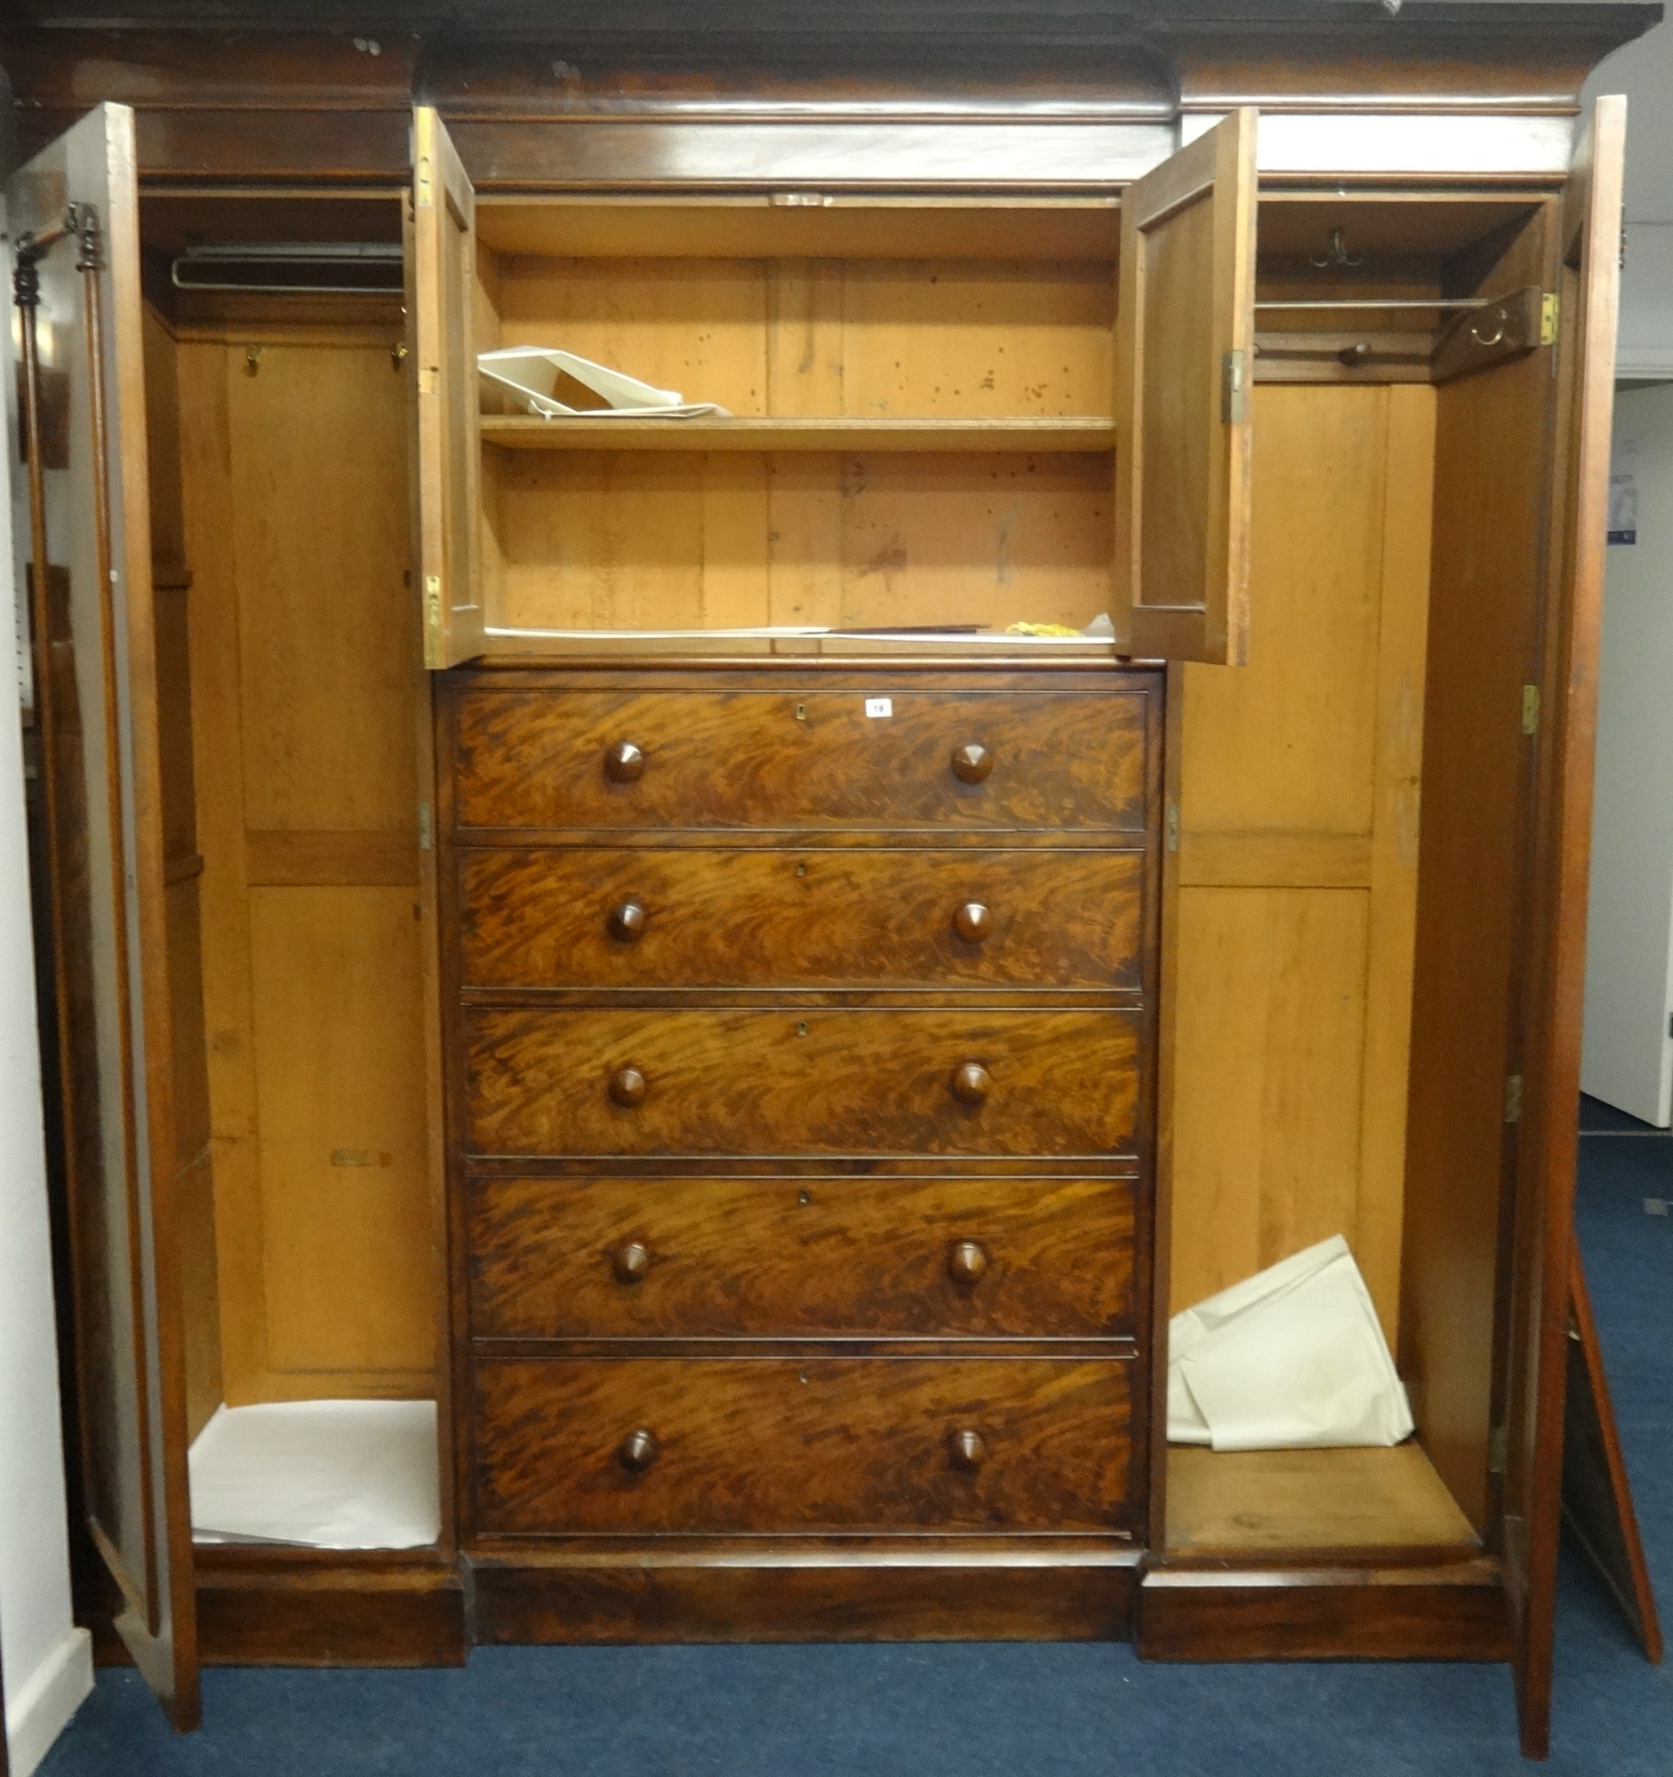 A 19th century mahogany Sentry compactum wardrobe, the pair of full length hanging cupboards - Image 2 of 2